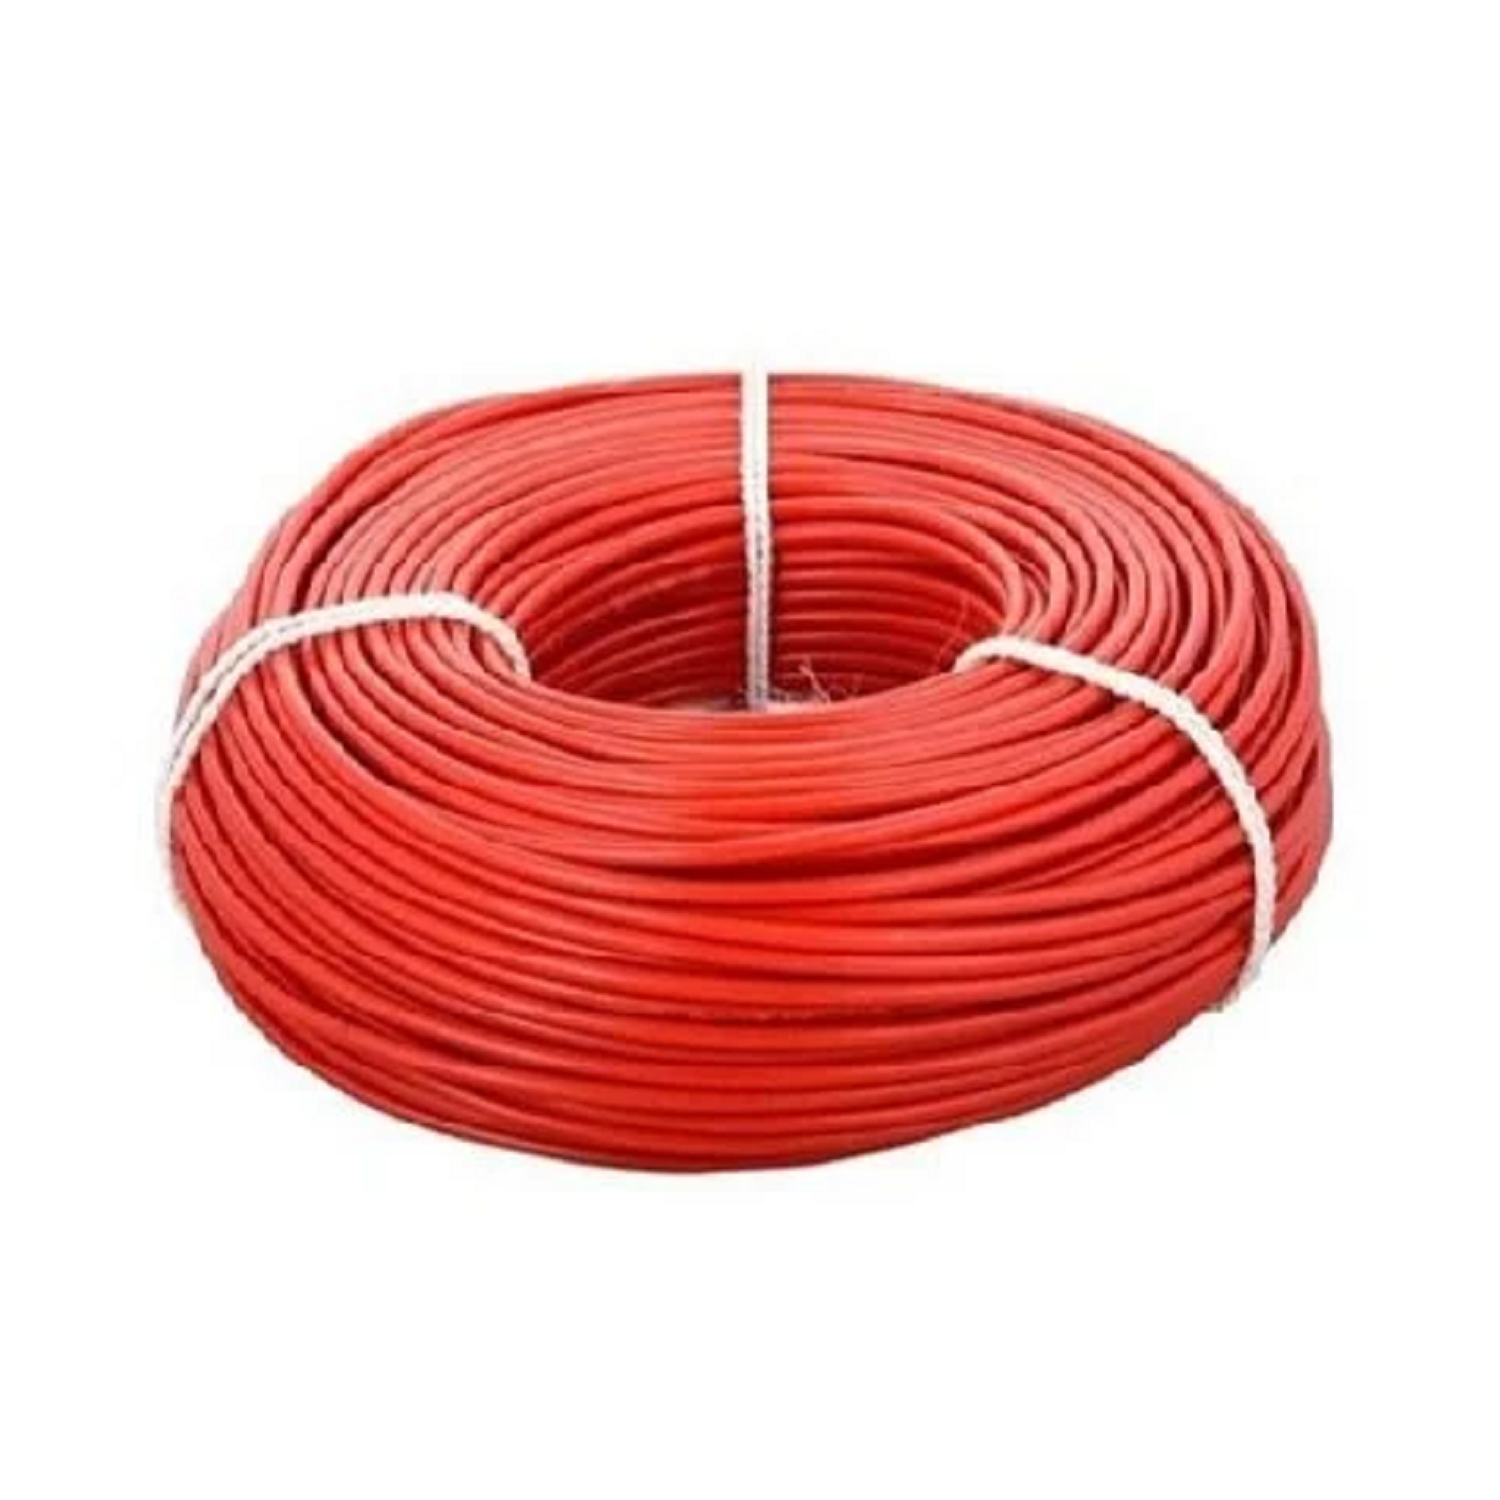 6.0 Sqmm KEI FR Single Core Copper Wire (180 Mtr) With PVC Insulated for Domestic 38 Industrial Uses